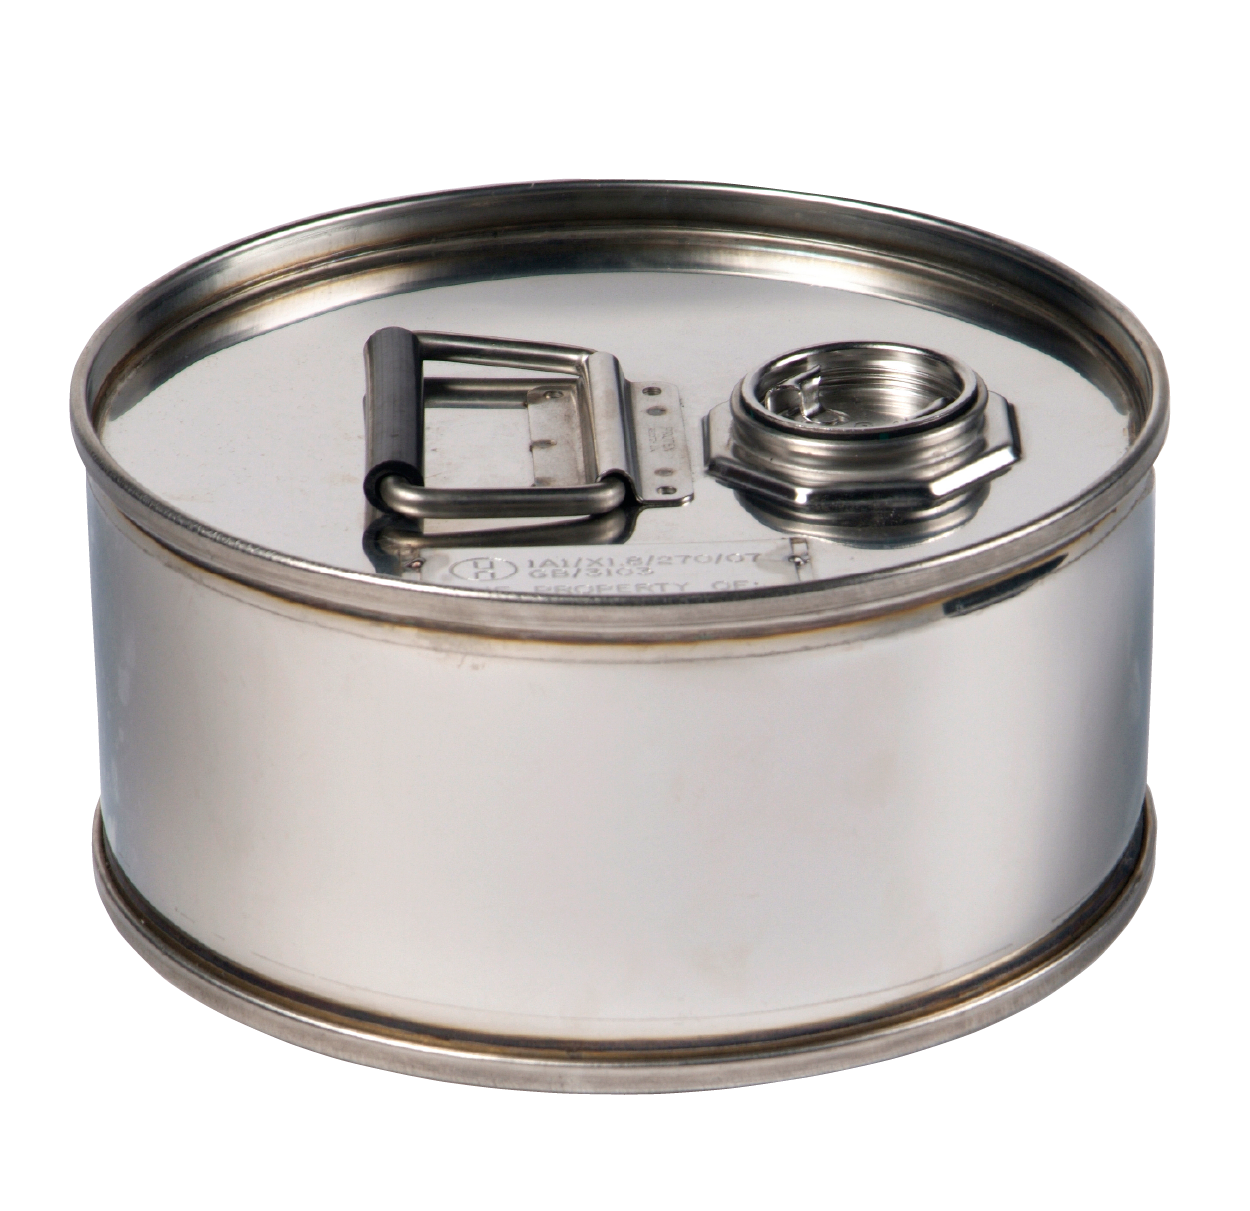 6l Un Stainless Steel Drum 1a1x18270 Air Sea Containers 3105